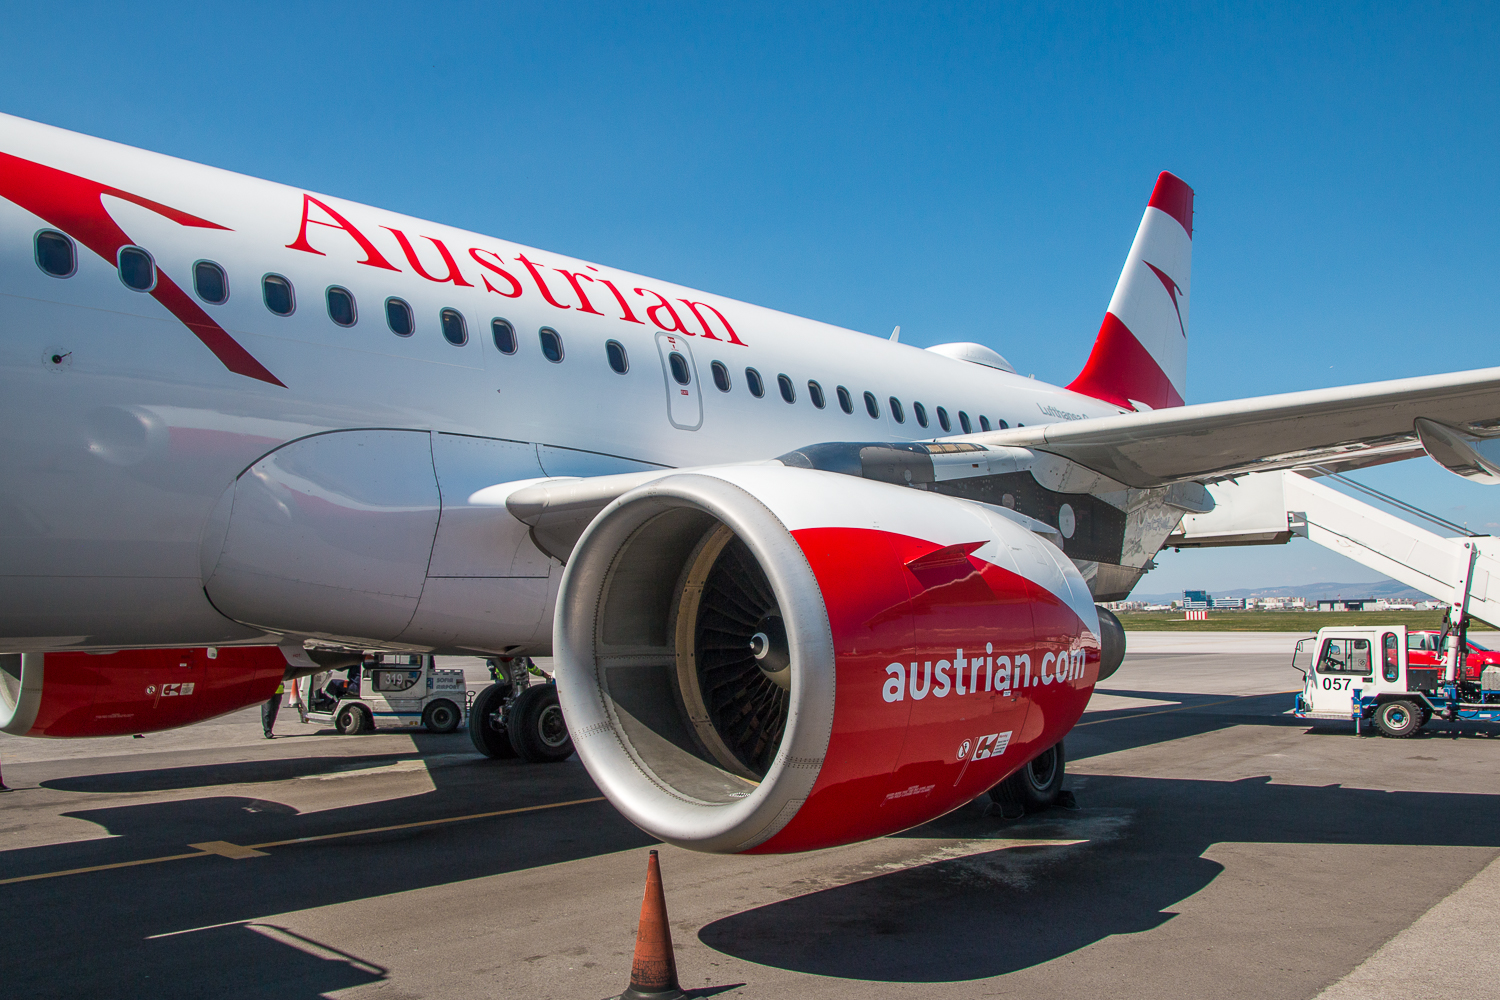 Austrian Airlines Airbus A319